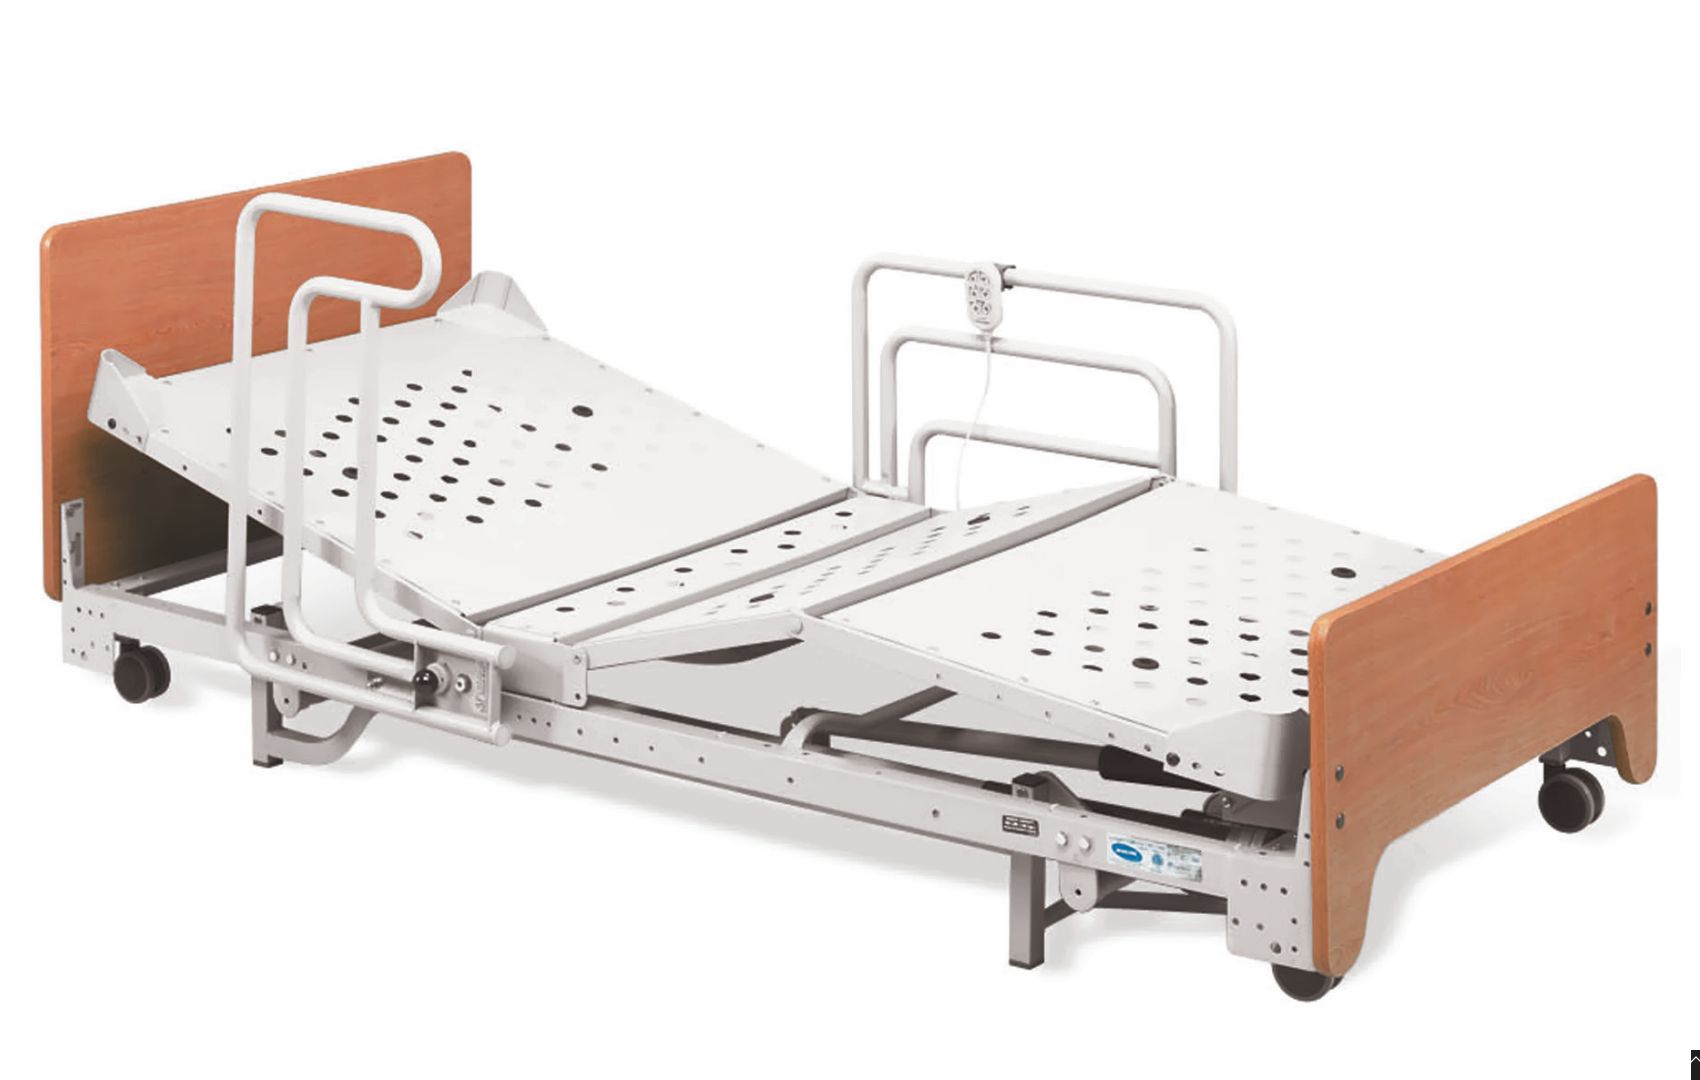 Hospital Beds & Patient Lifts - On The Mend Medical Supplies & Equipment